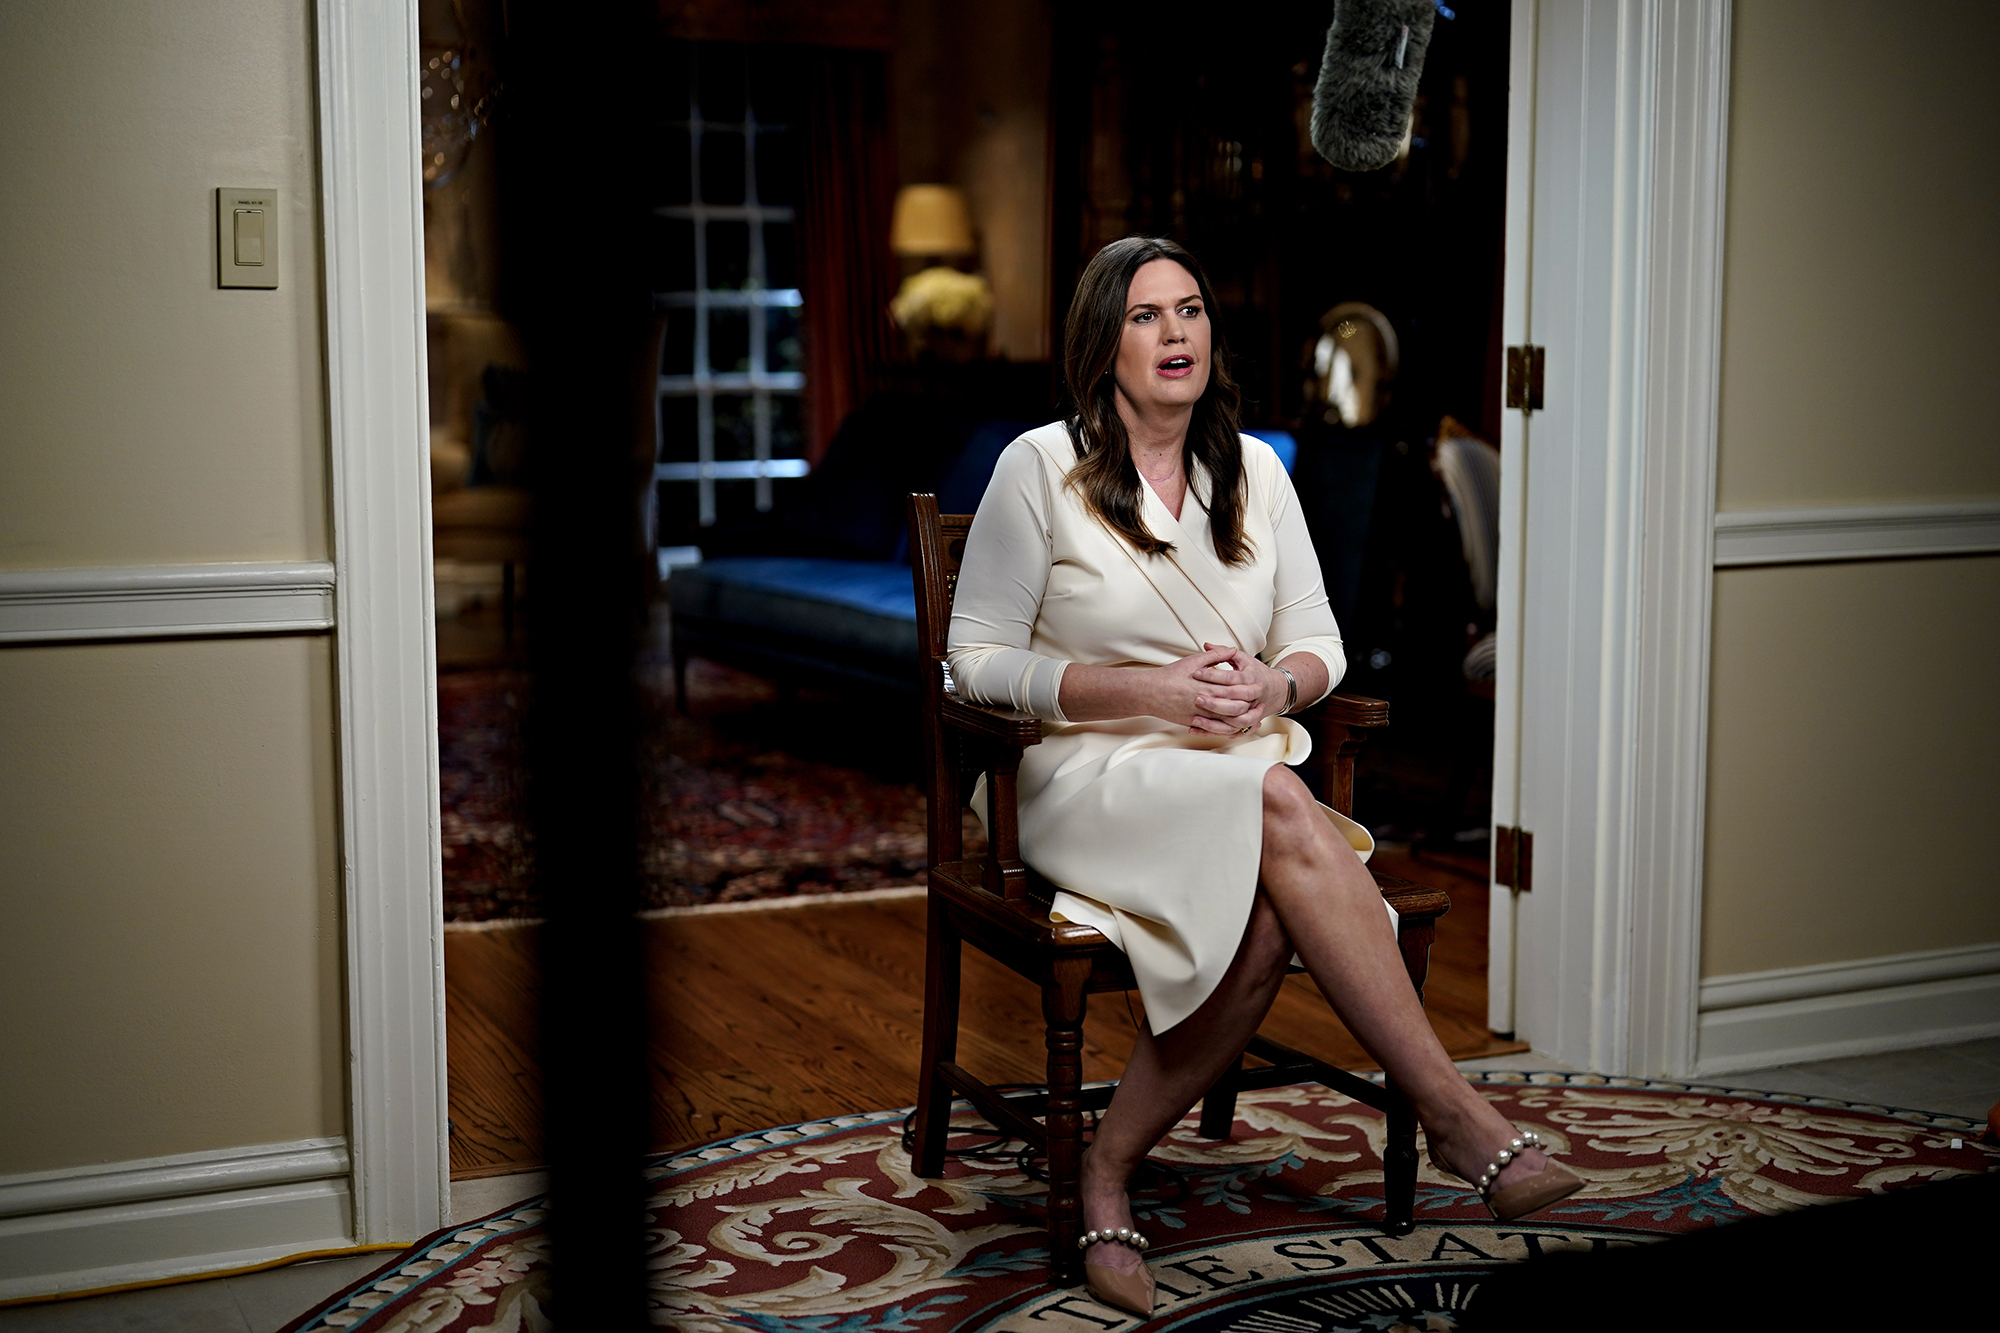 Arkansas Gov. Sarah Huckabee Sanders speaks while delivering the Republican response to President Biden's State of the Union address in Little Rock, Arkansas.